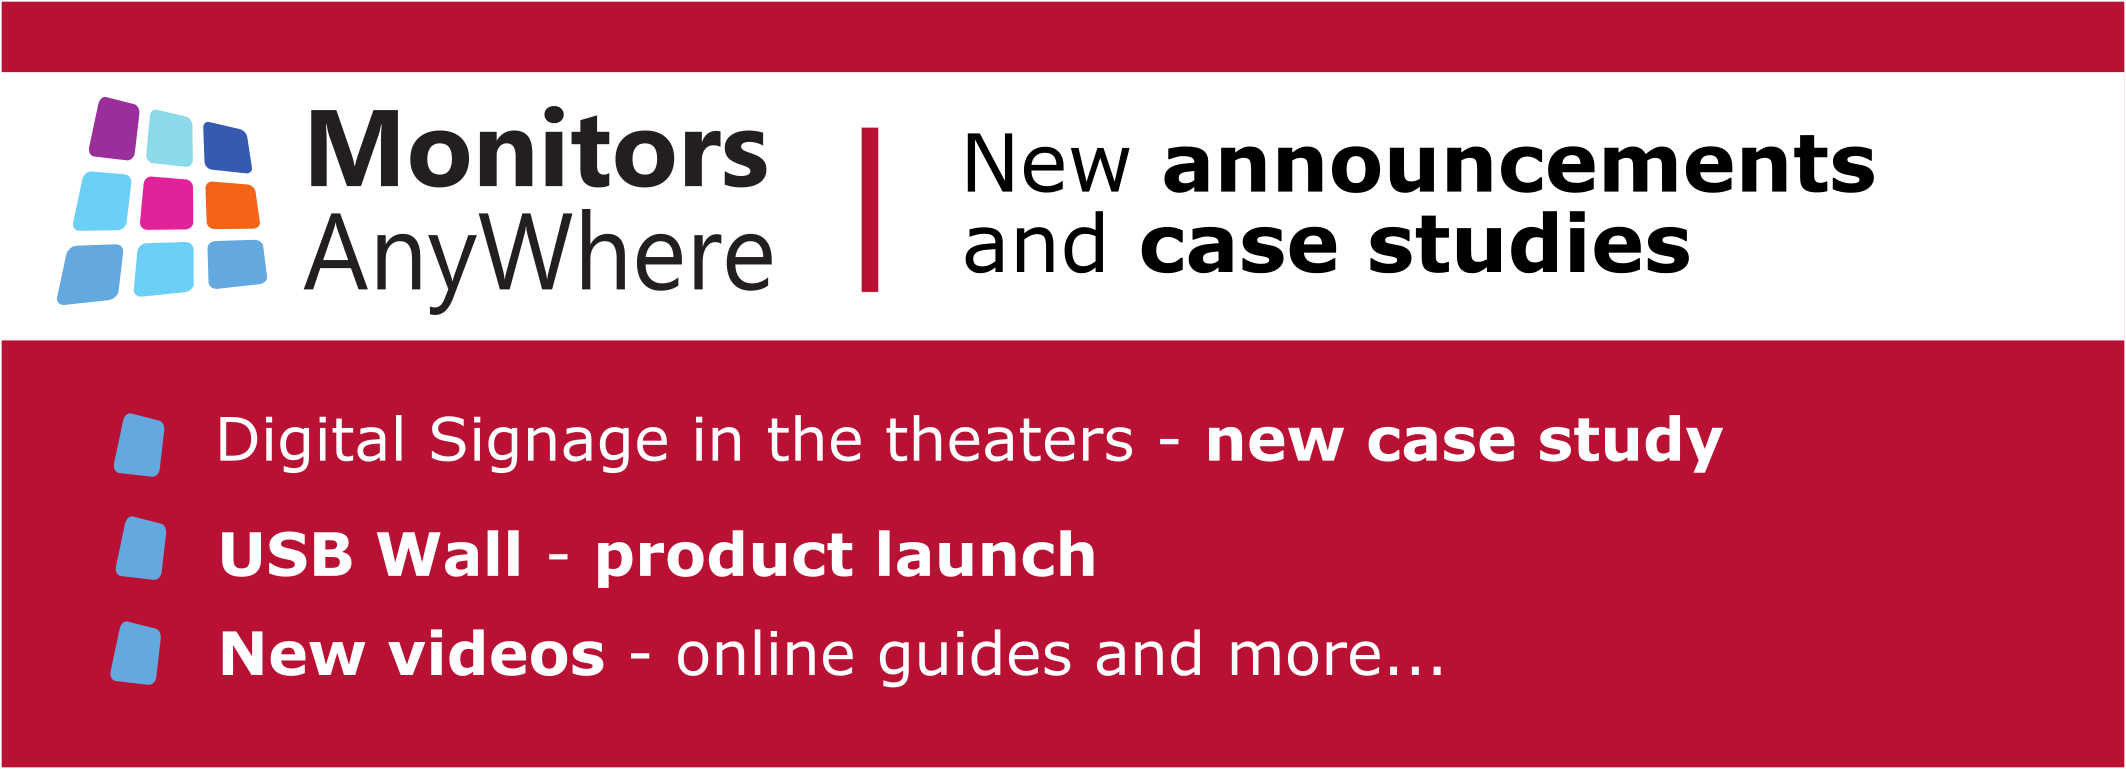 monitor anywhere new case study announcement 2017